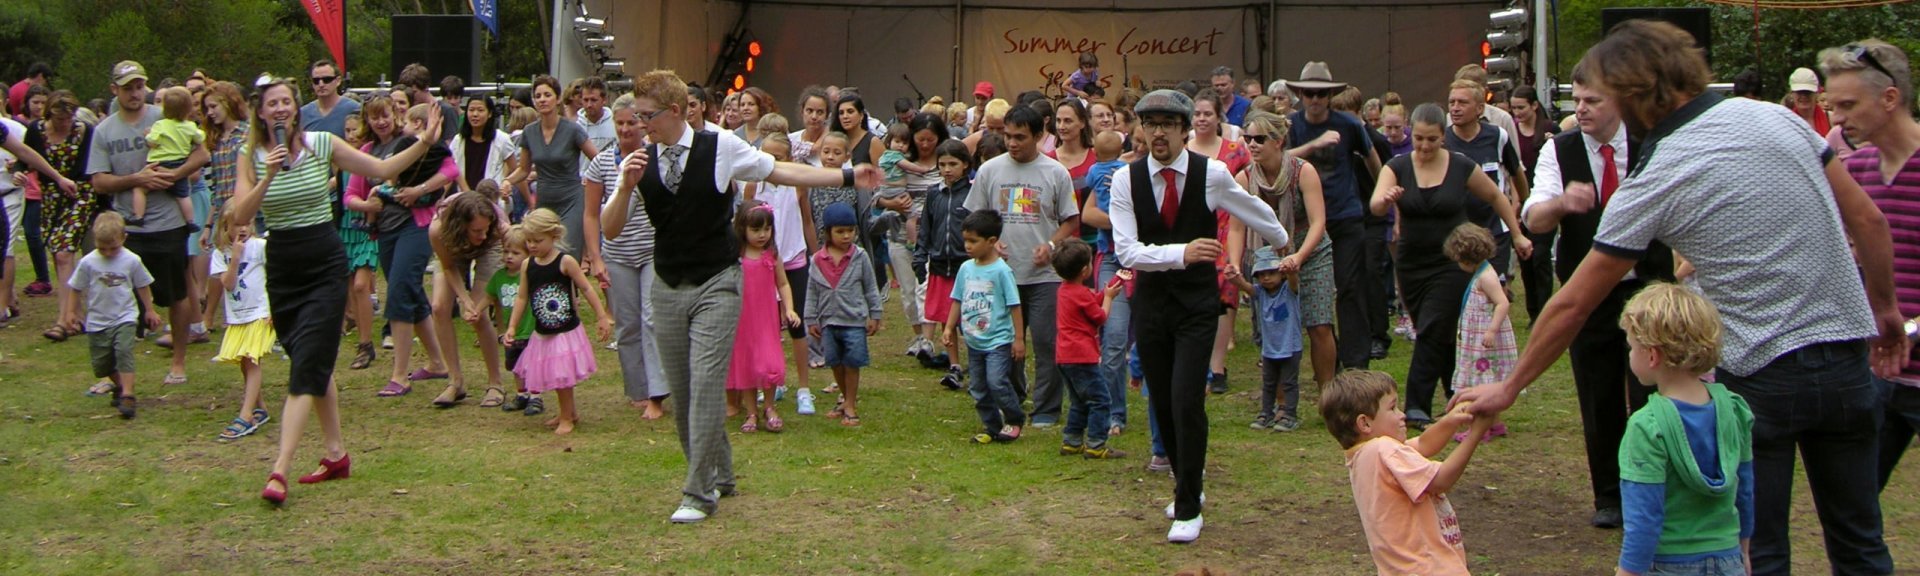 Canberra Swing Katz leading a dance at Summer Sounds